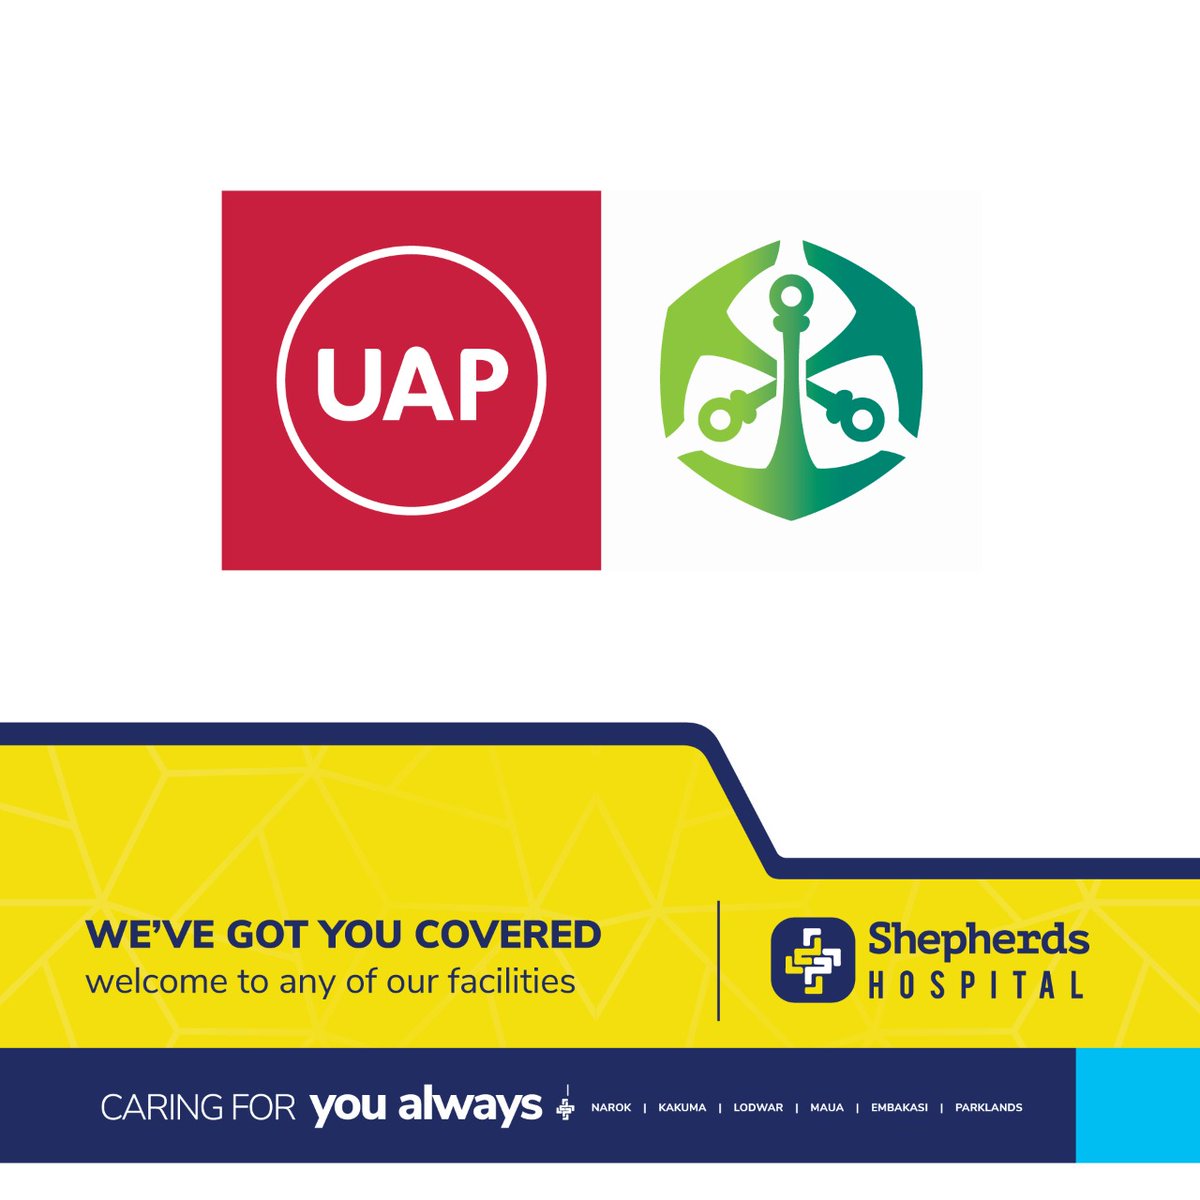 You are able to access services at any of our facilities with your UAP card.

#uapinsurance
#caringforyoualways
#shepherdshospital